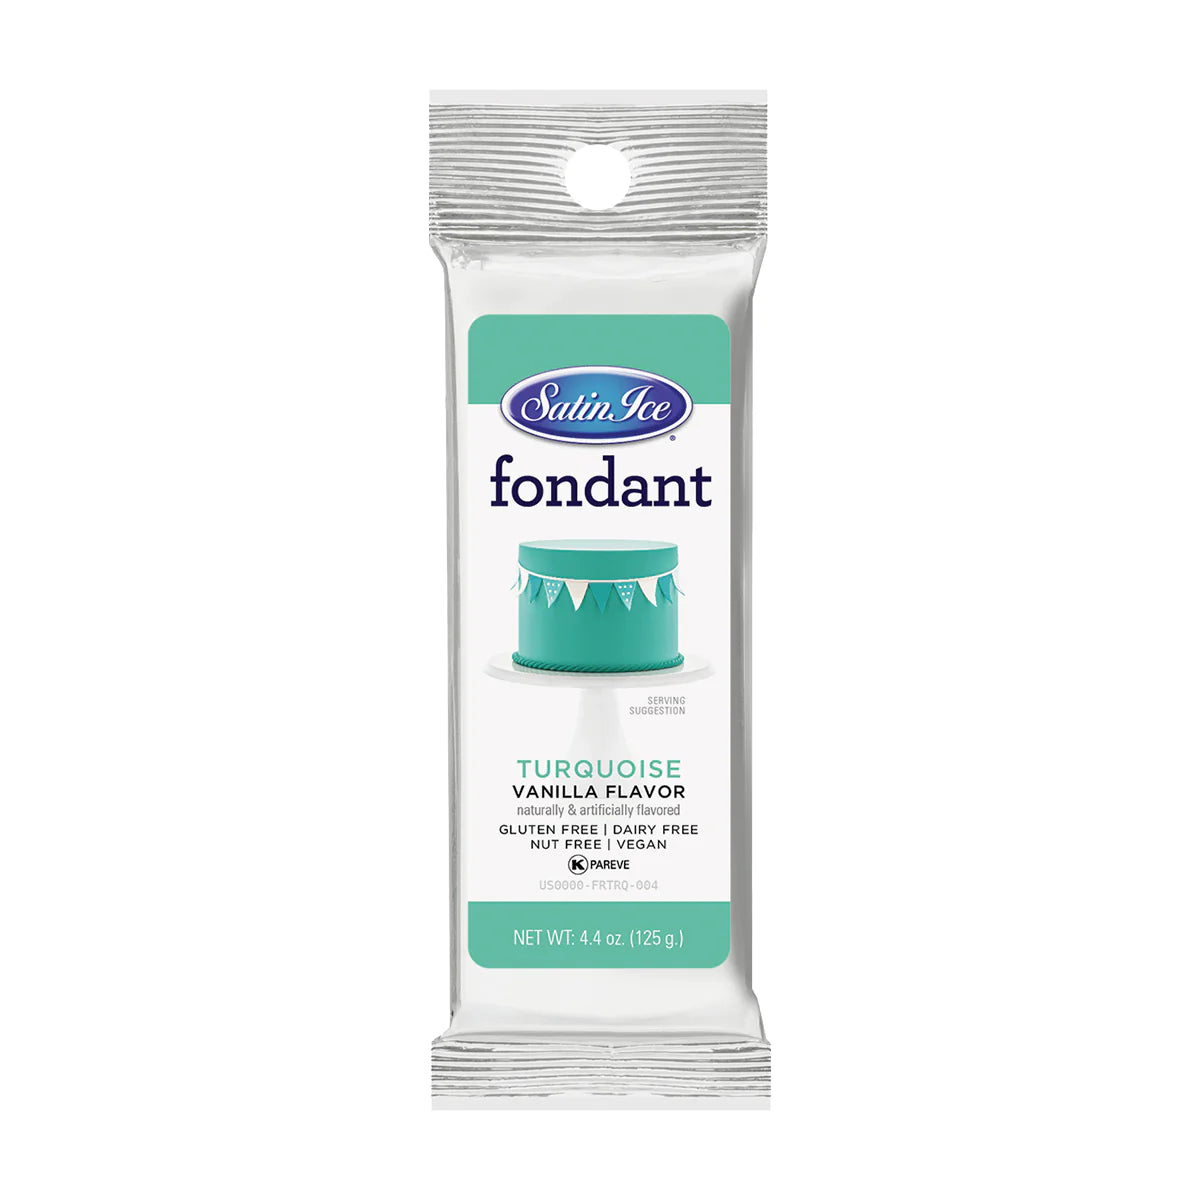 Turquoise Colored and Vanilla Flavored Fondant in a 4.4 Ounce Foil Pouch